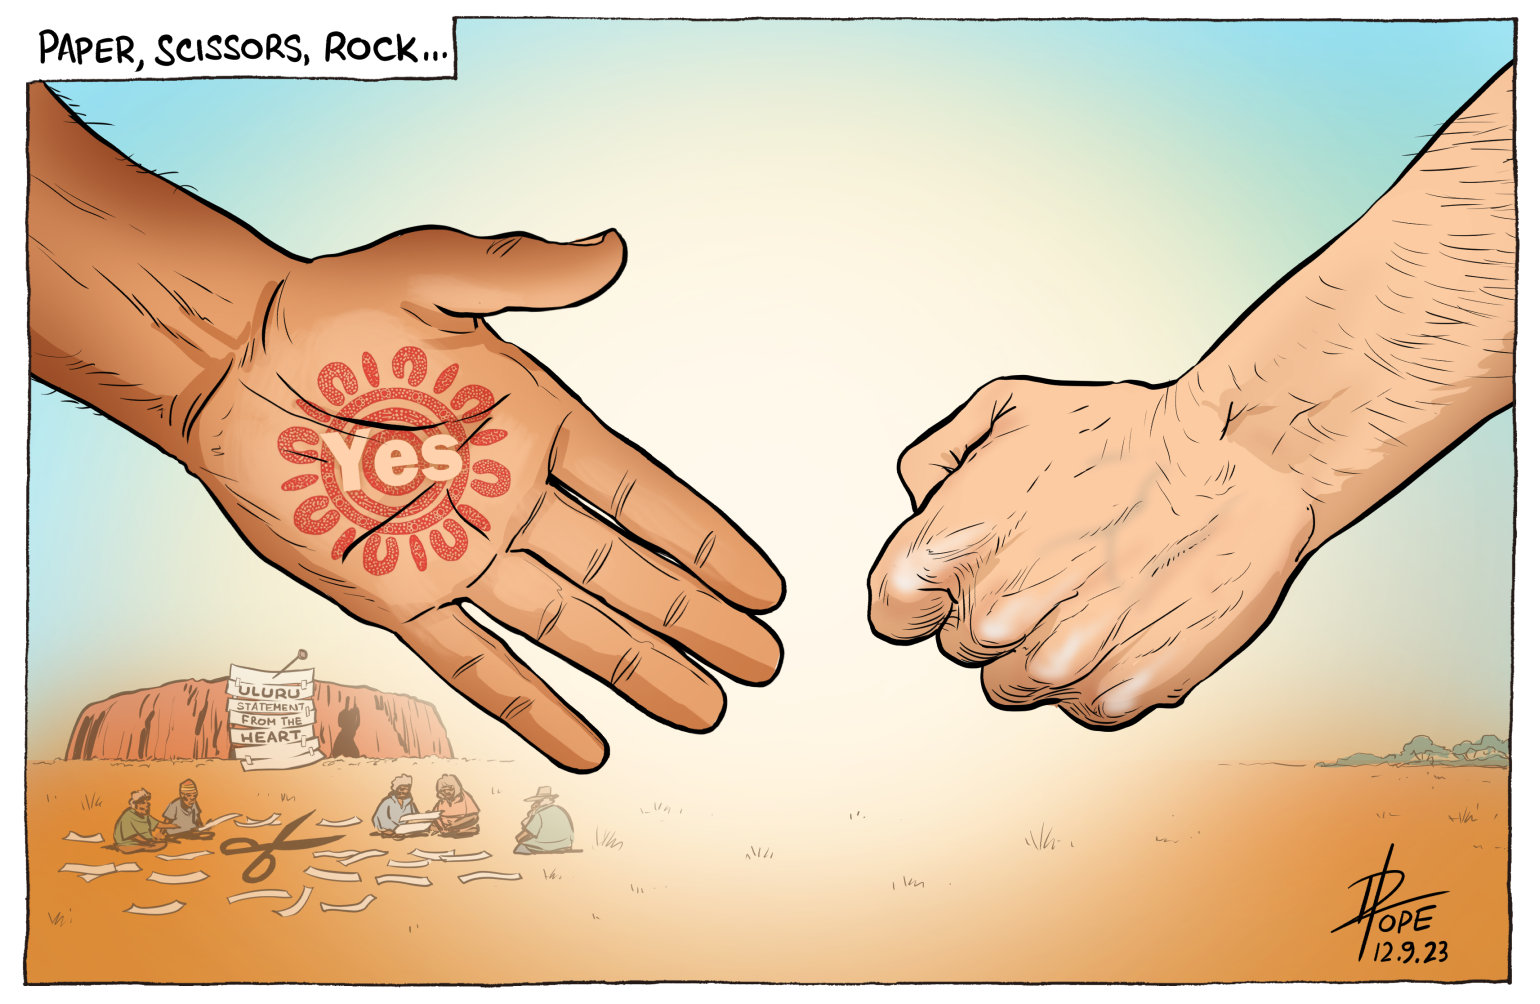 A cartoon about the Voice referendum, the outstretched hand of Yes being met by the closed fist of No.